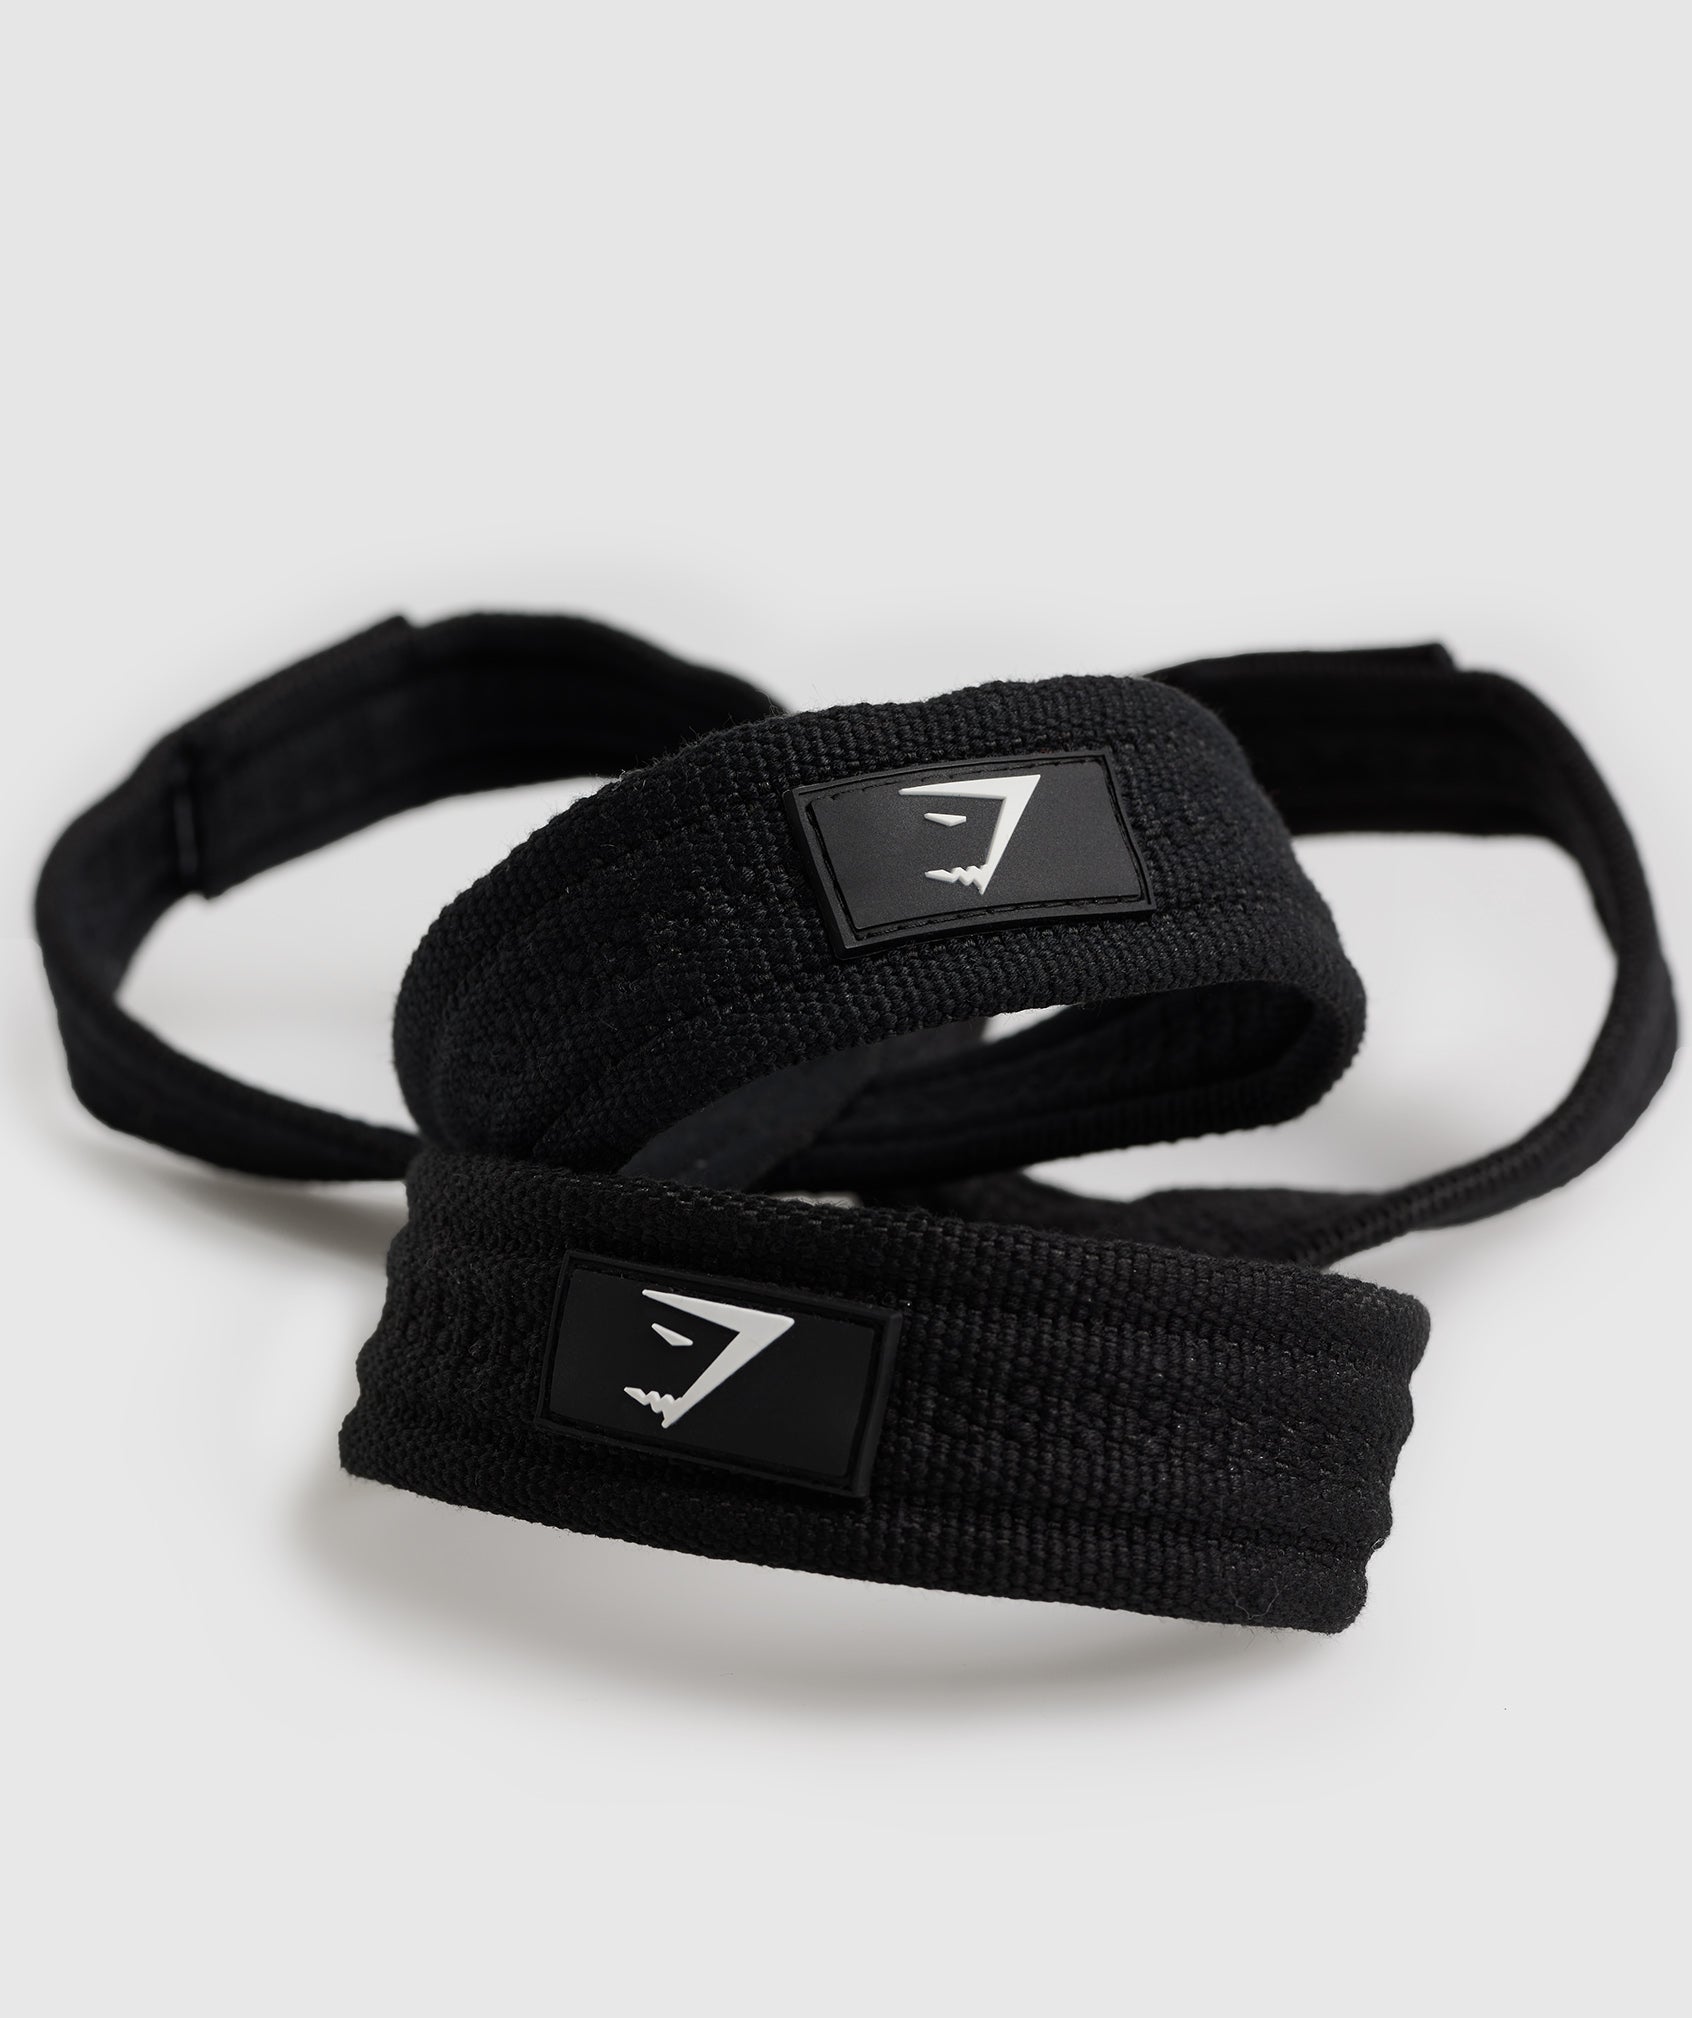 Wholesale Gymshark Wrist Straps Products at Factory Prices from  Manufacturers in China, India, Korea, etc.